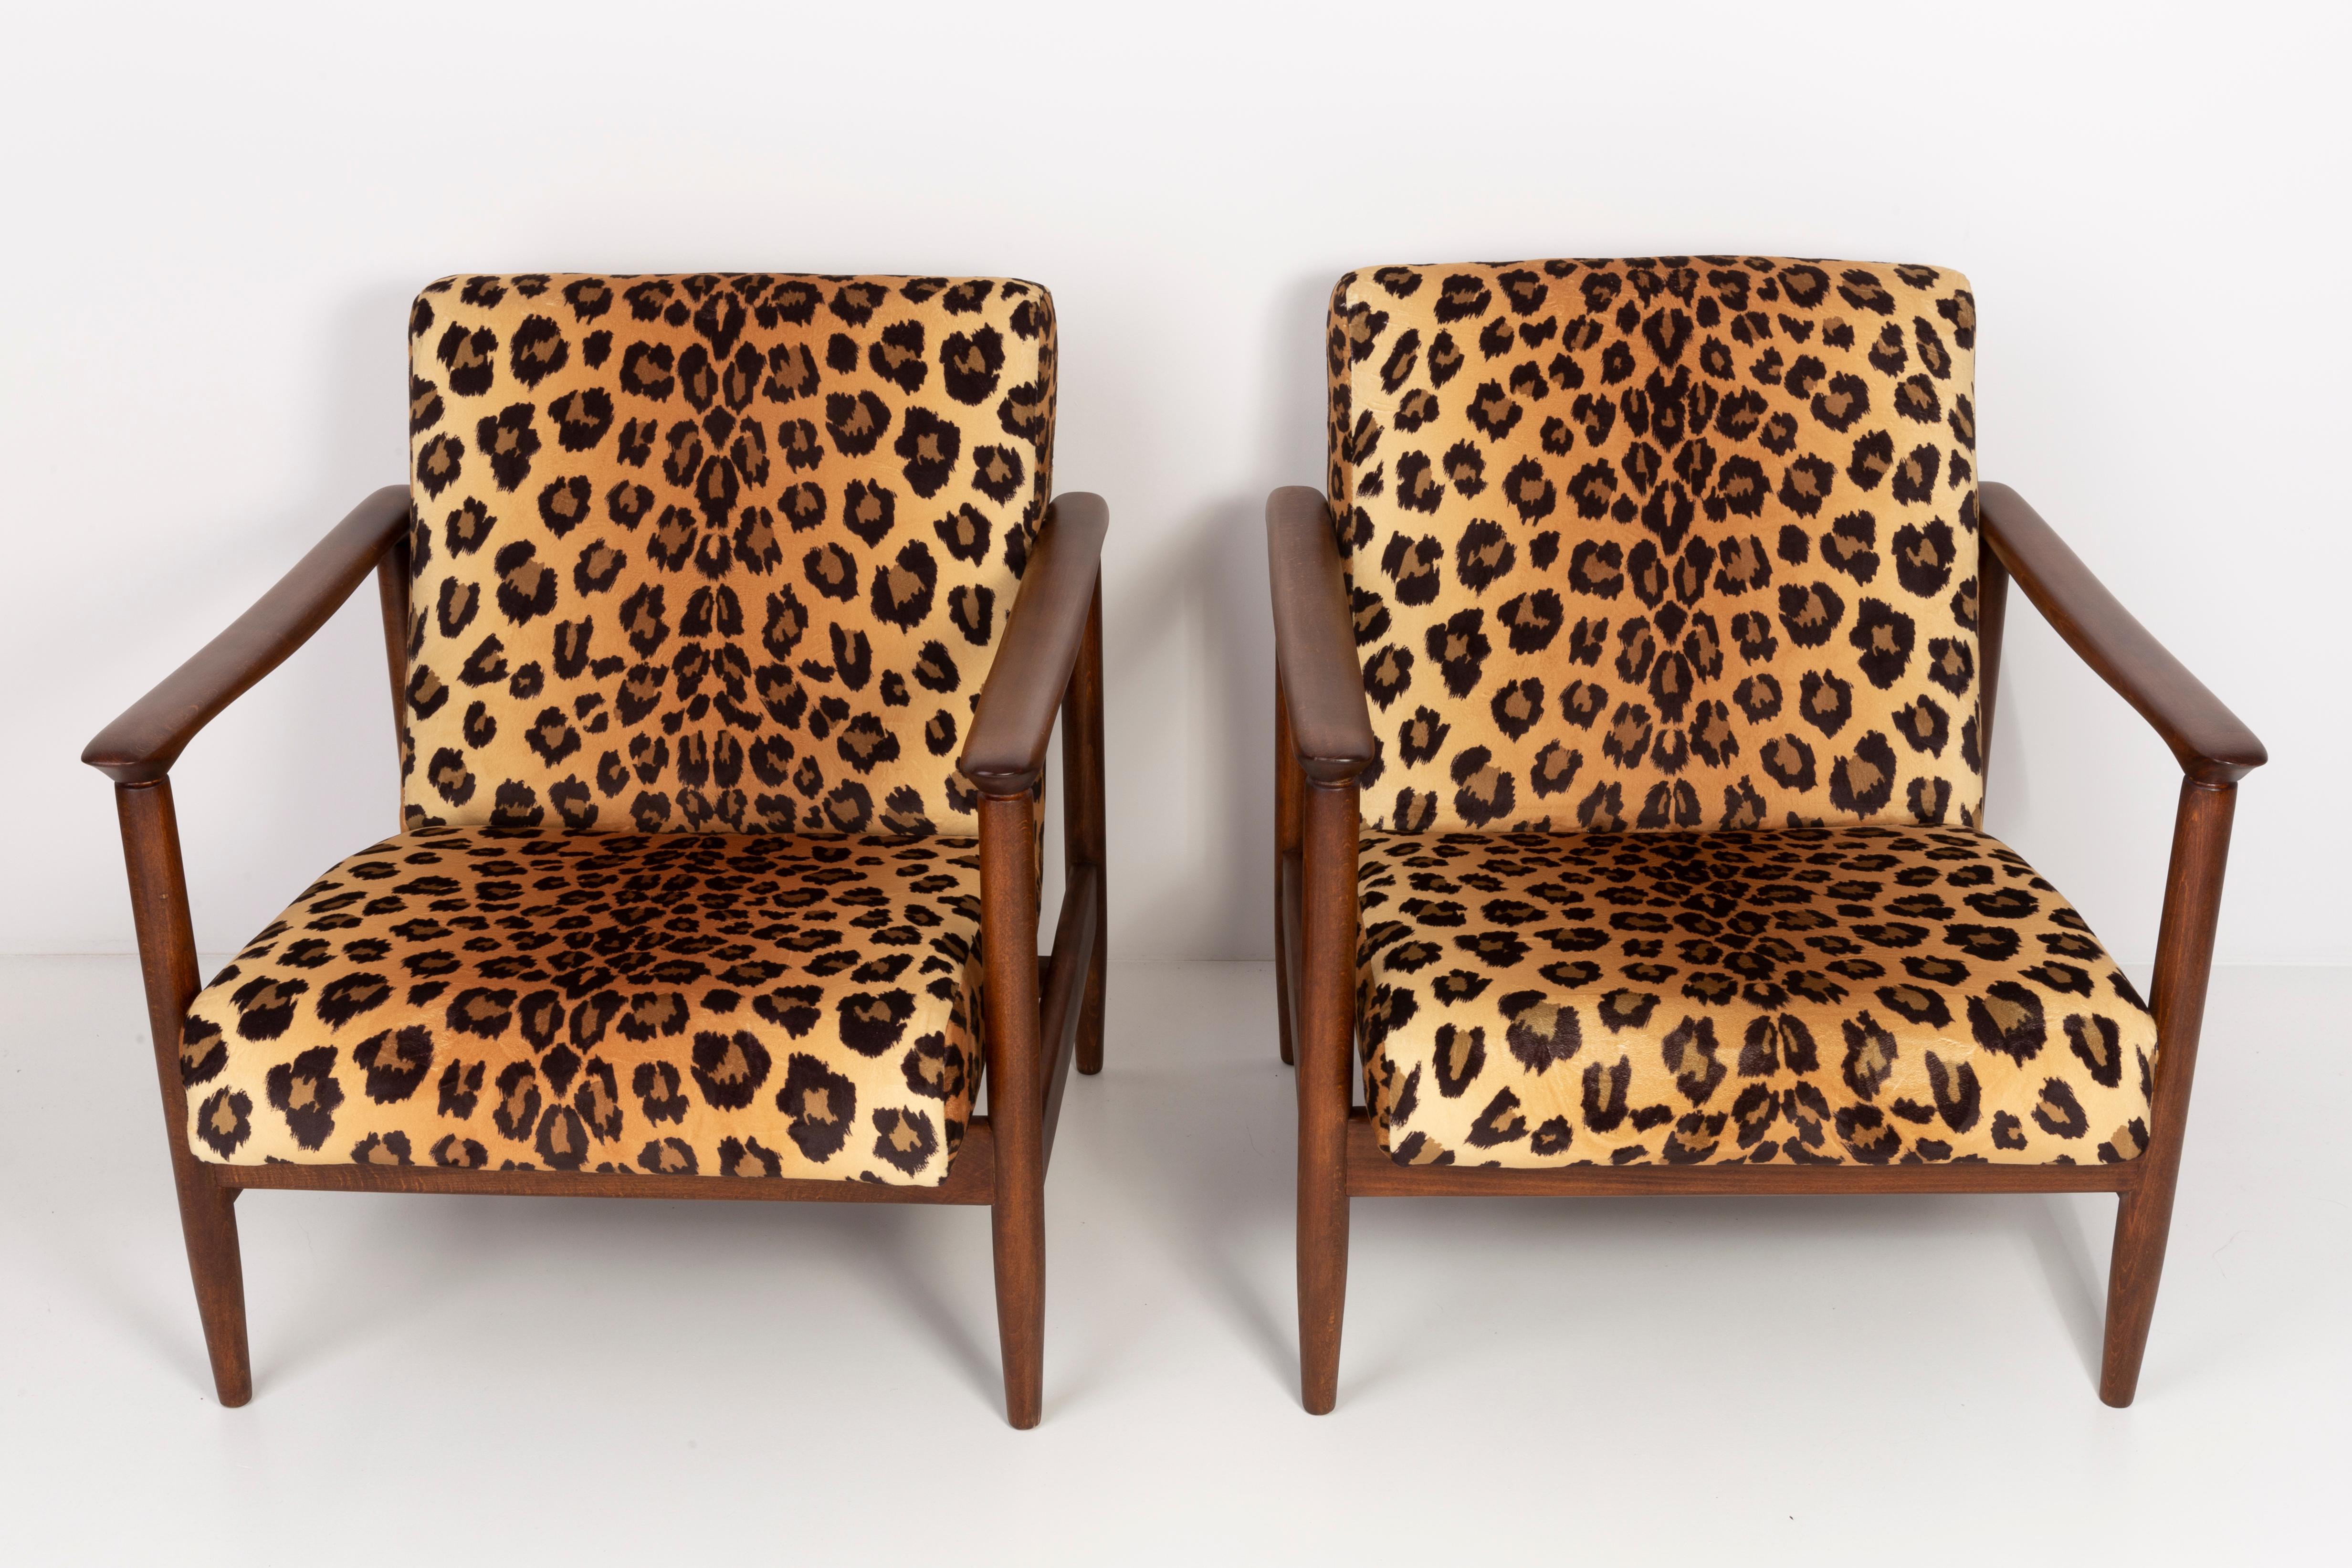 A pair of armchairs GFM-142 leopard armchairs, designed by Edmund Homa, a polish architect, designer of Industrial Design and interior architecture, professor at the Academy of Fine Arts in Gdansk.

The armchairs were made in the 1960s in the